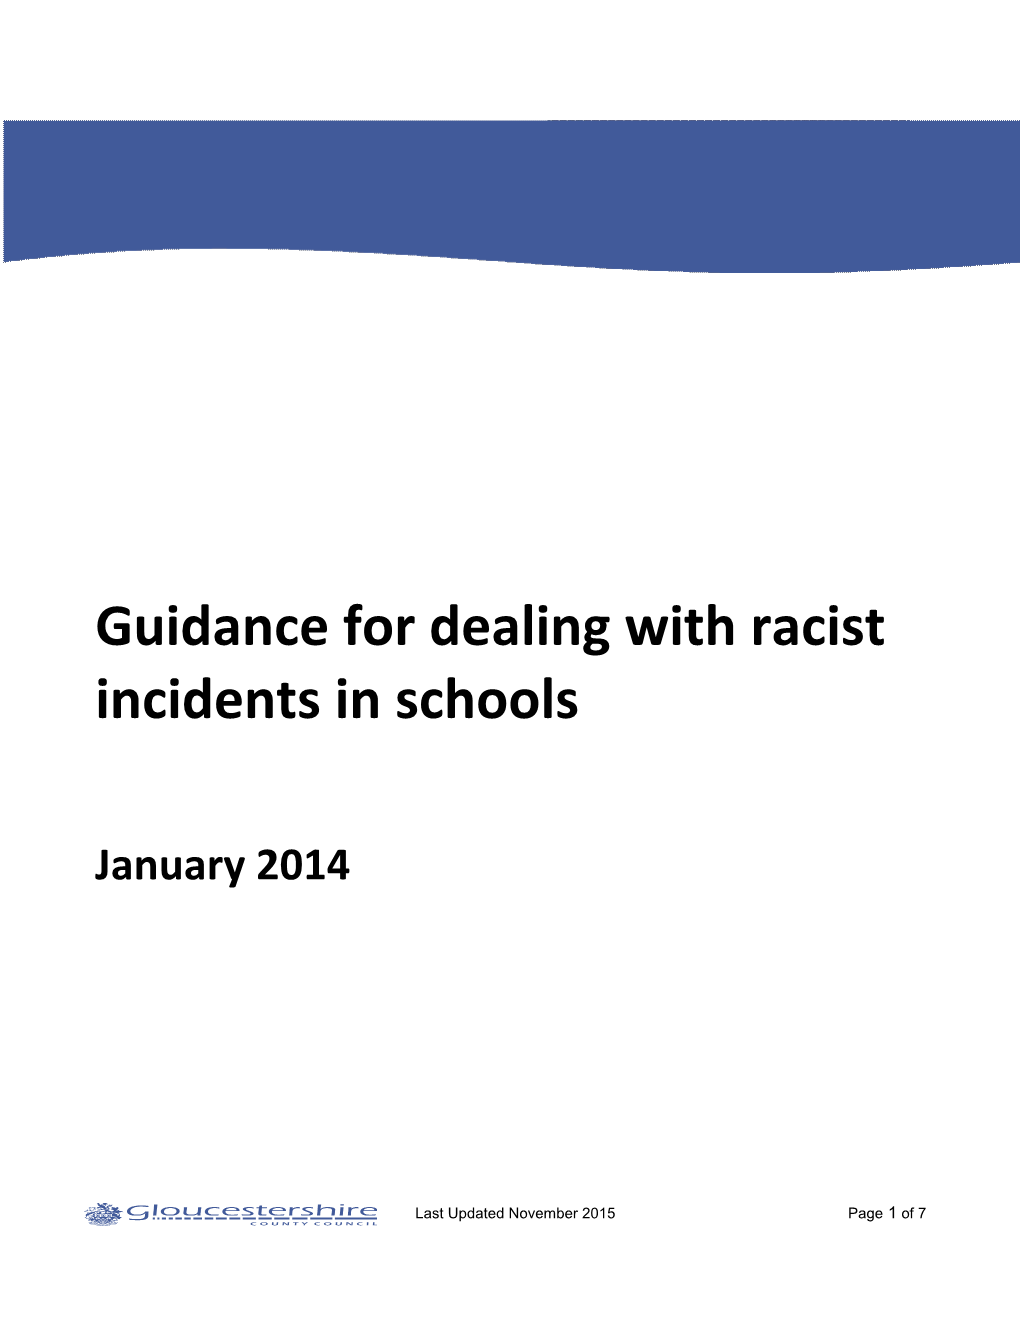 Guidance for Dealing with Racist Incidents in Schools